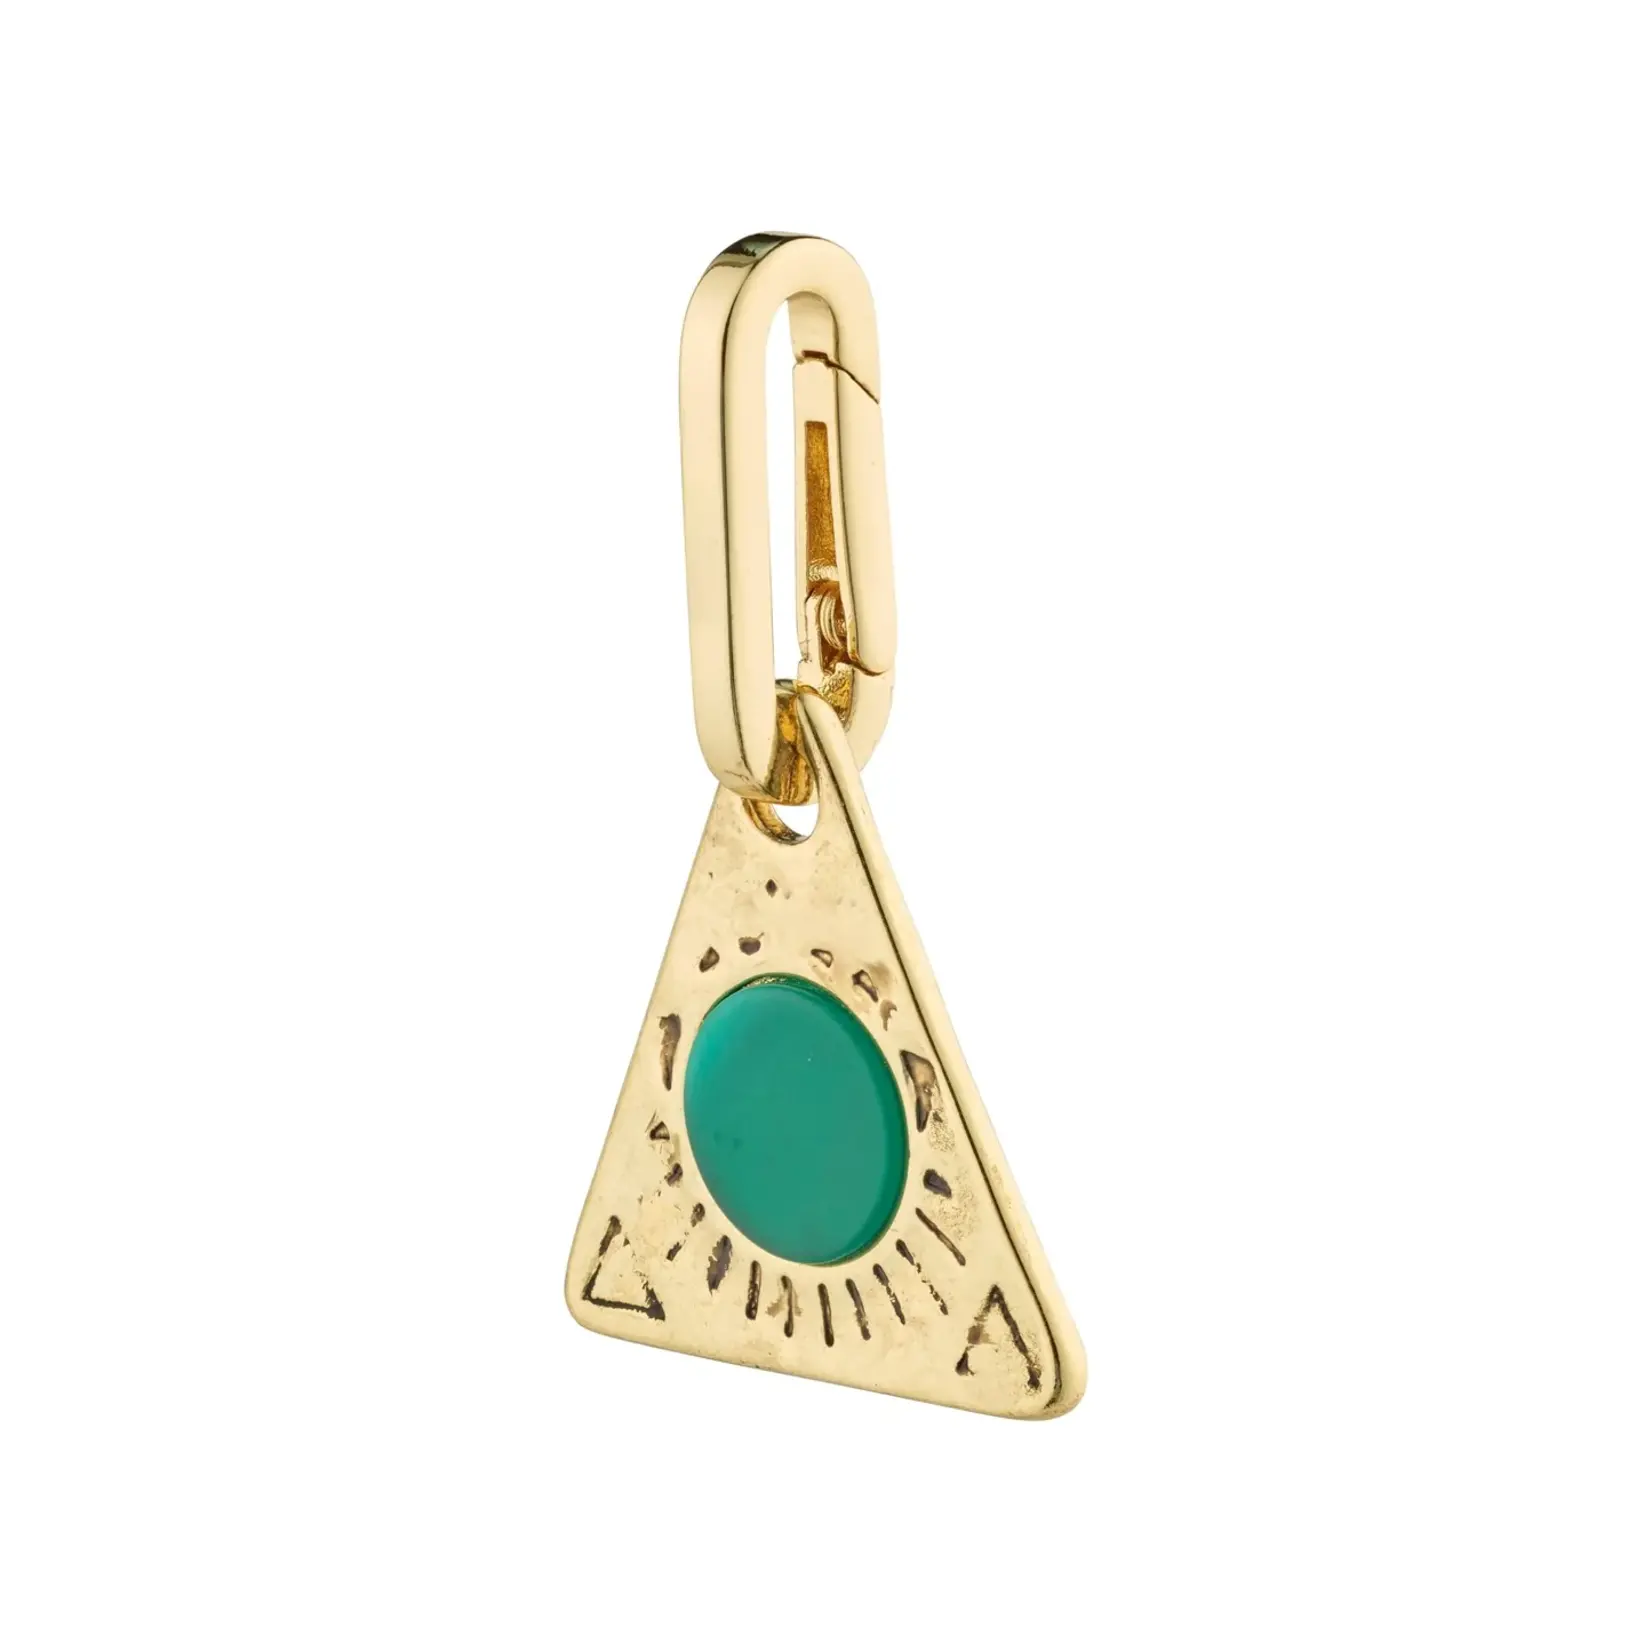 Pilgrim Charm Recycled Triangle Pendant, Green/Gold Plated